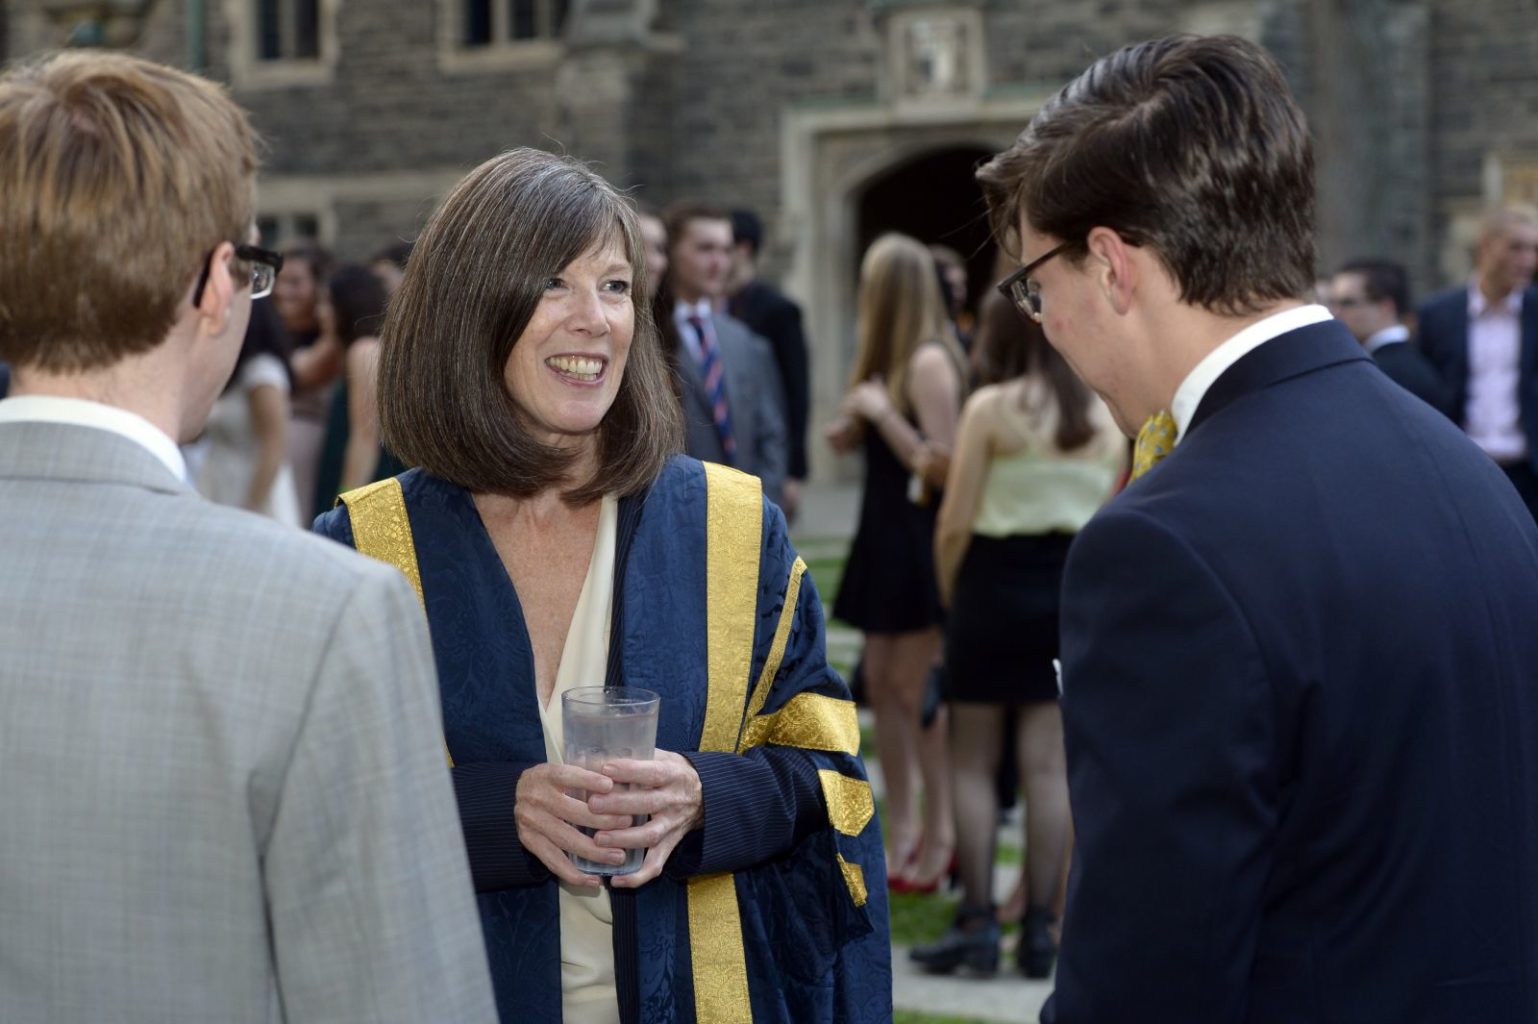 Provost Moran at the Matriculation Convocation 2014 Reception in the Quad